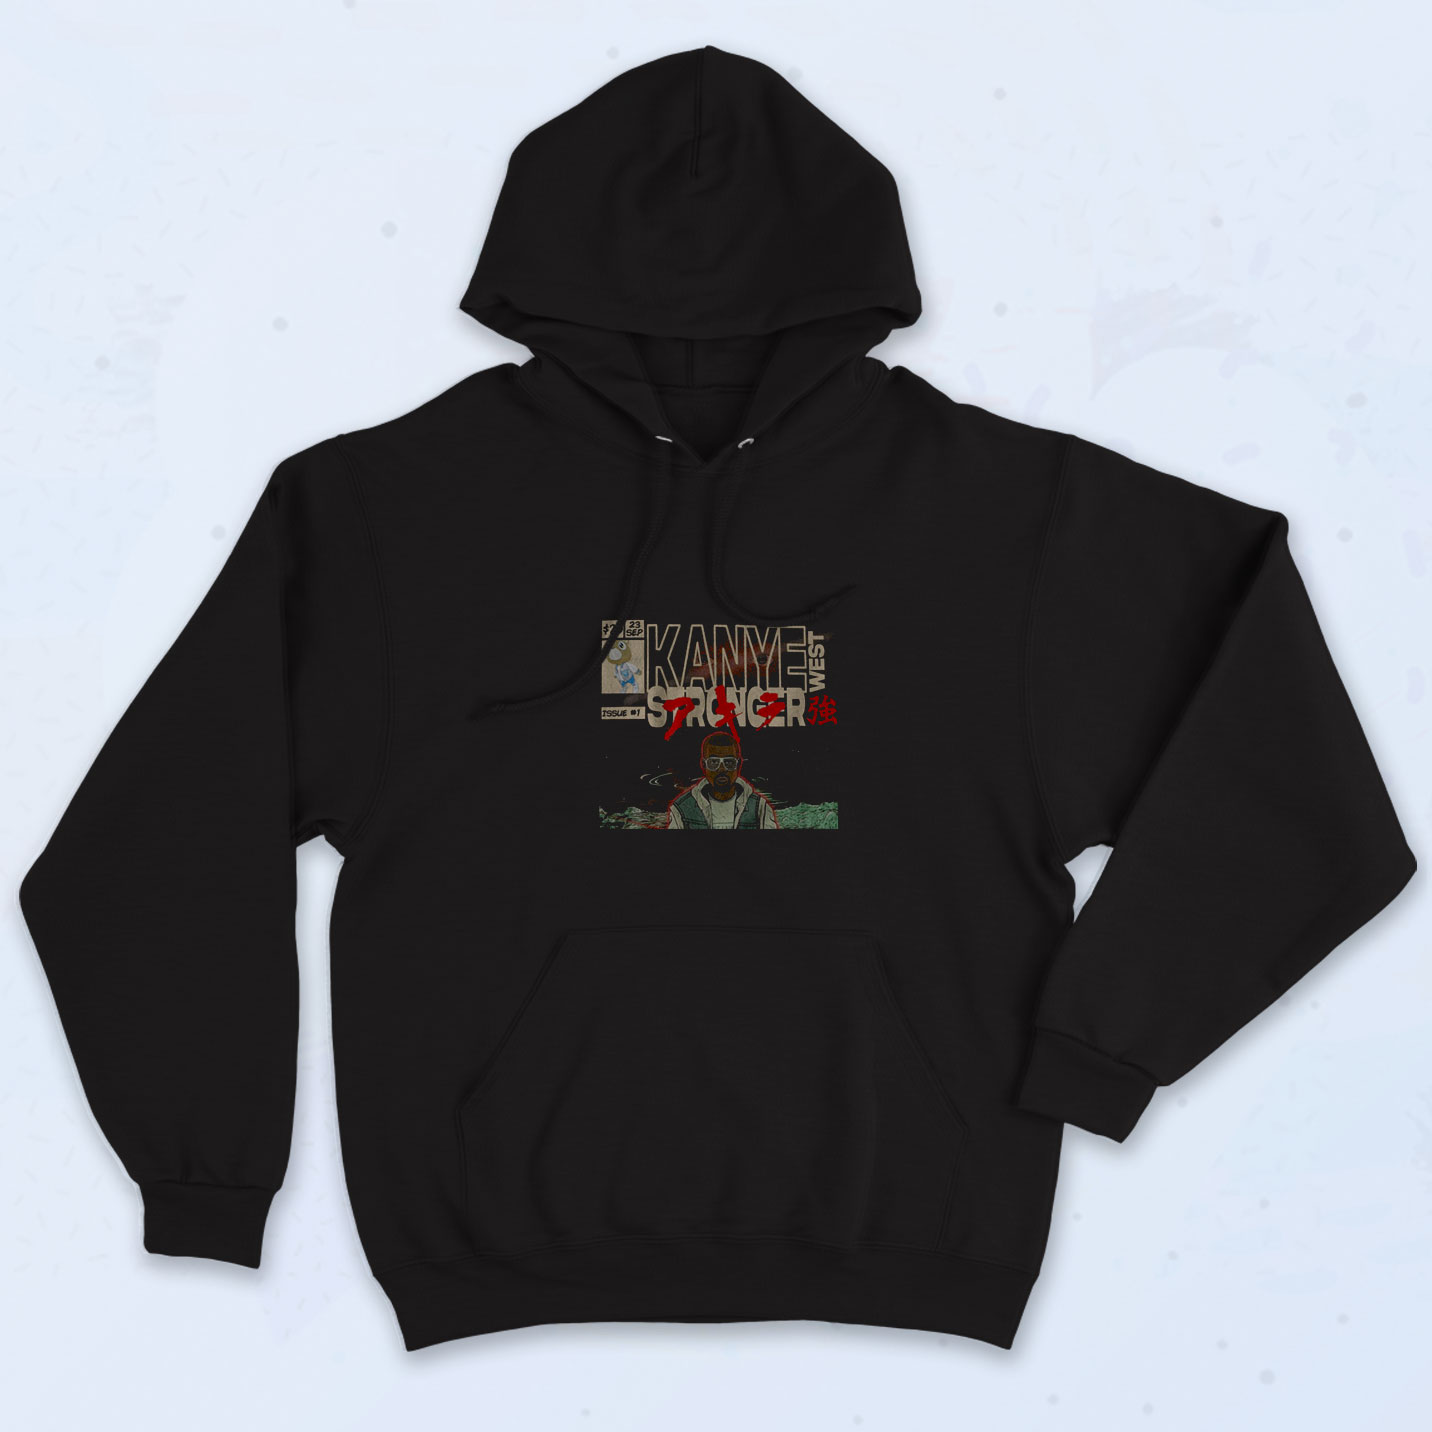 Rapper Kanye West Jeen yuhs Stronger Hoodie - 90sclothes.com